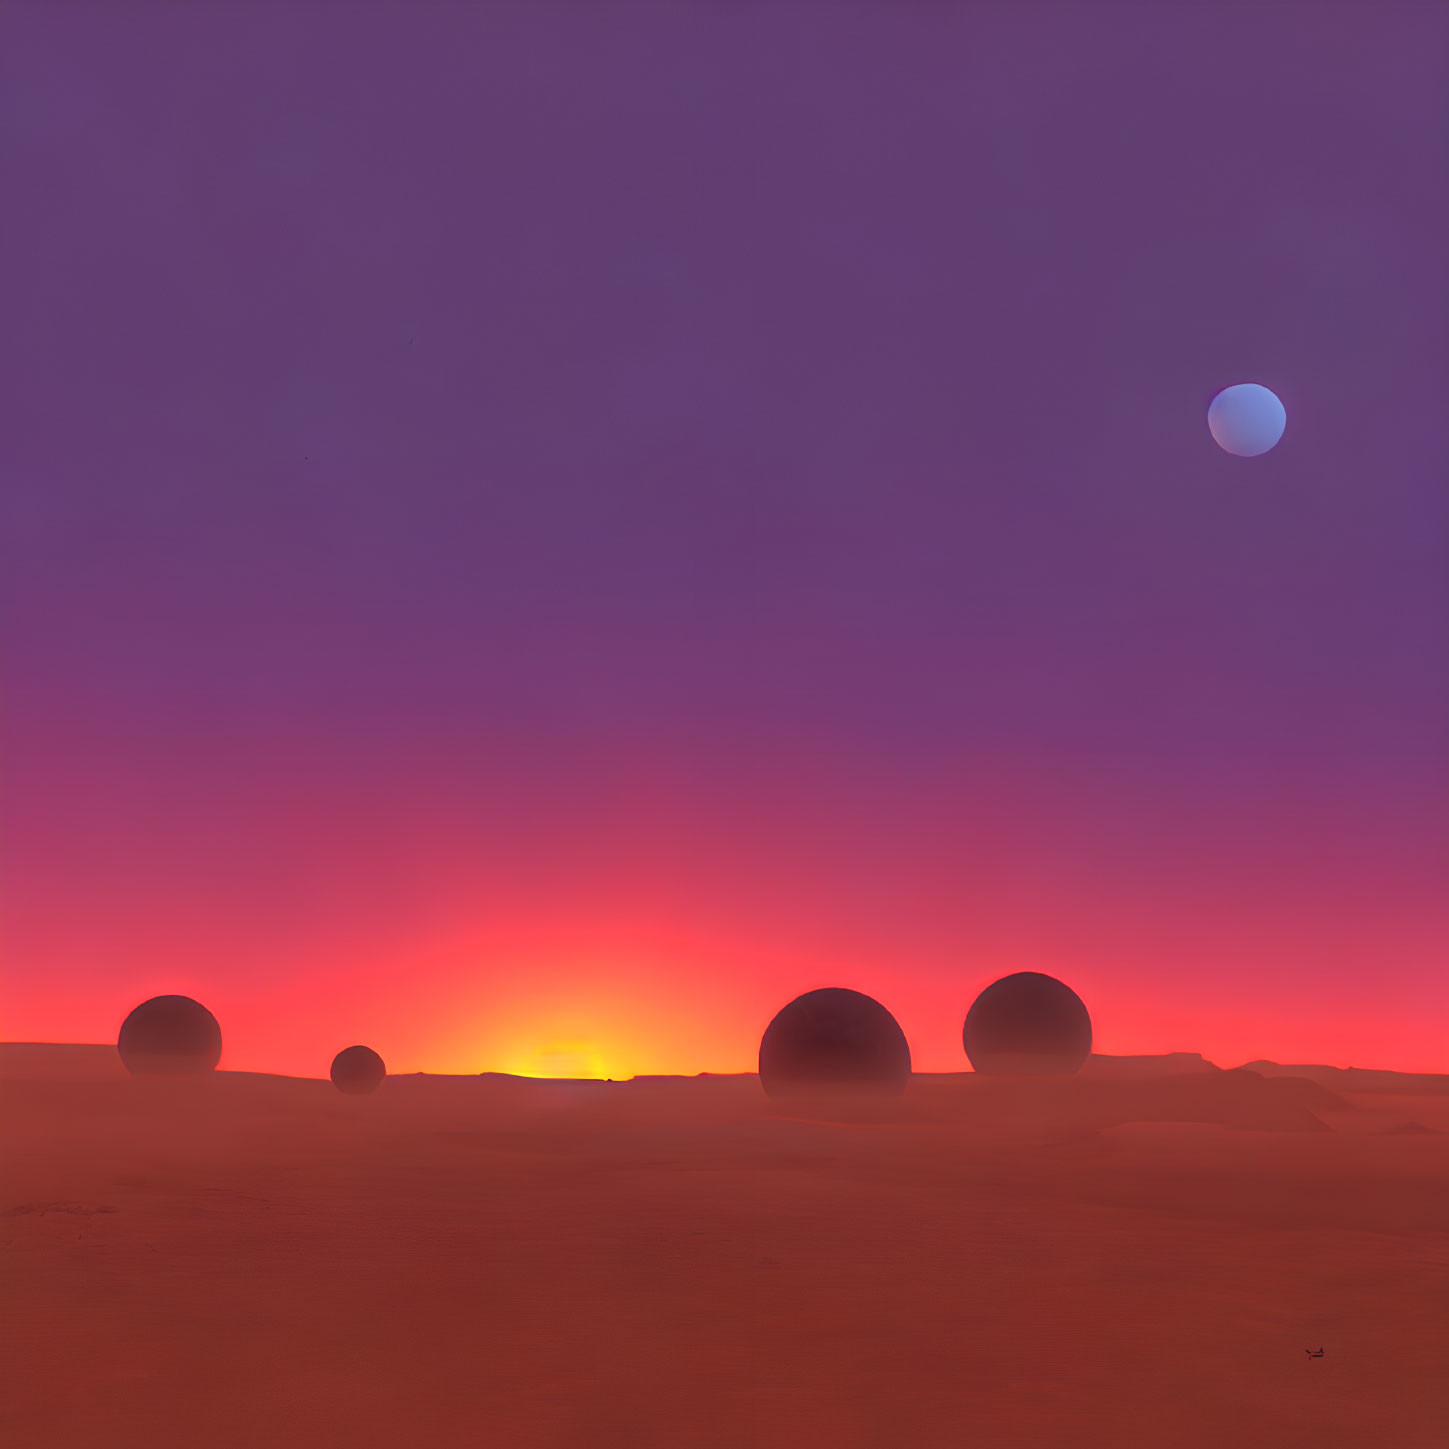 Vibrant pink-orange sunset landscape with round structures